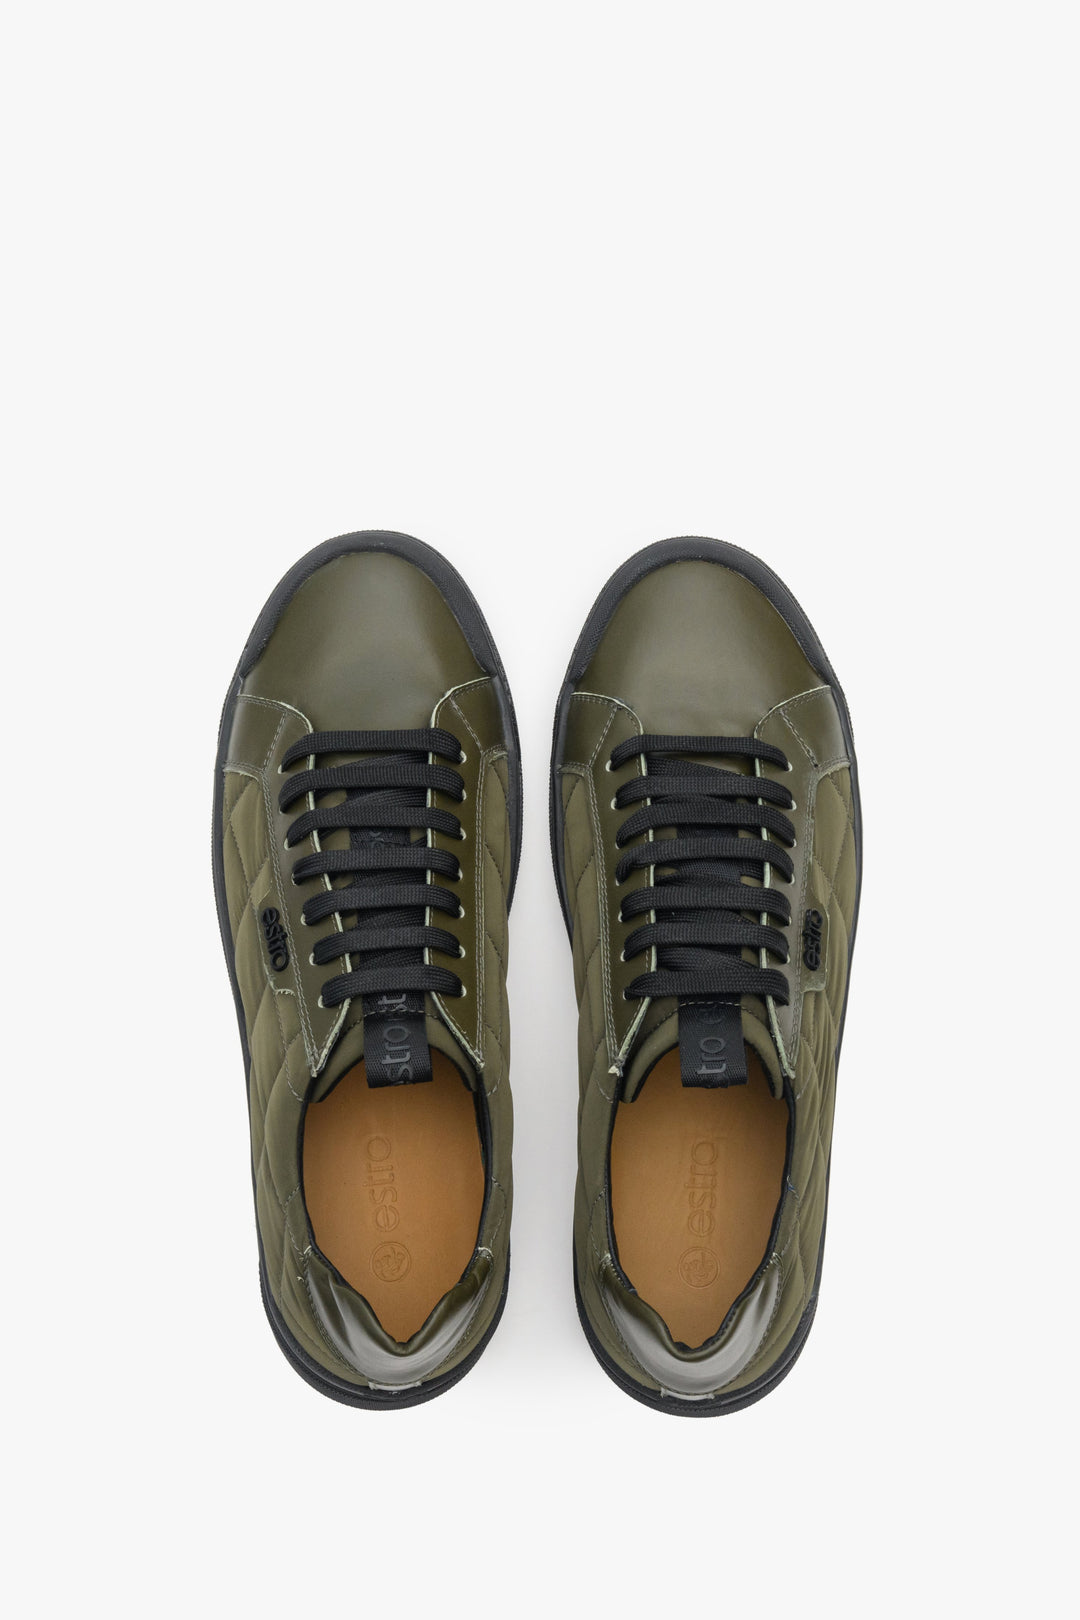 Men's green spring and autumn Estro sneakers - footwear presentation from above.